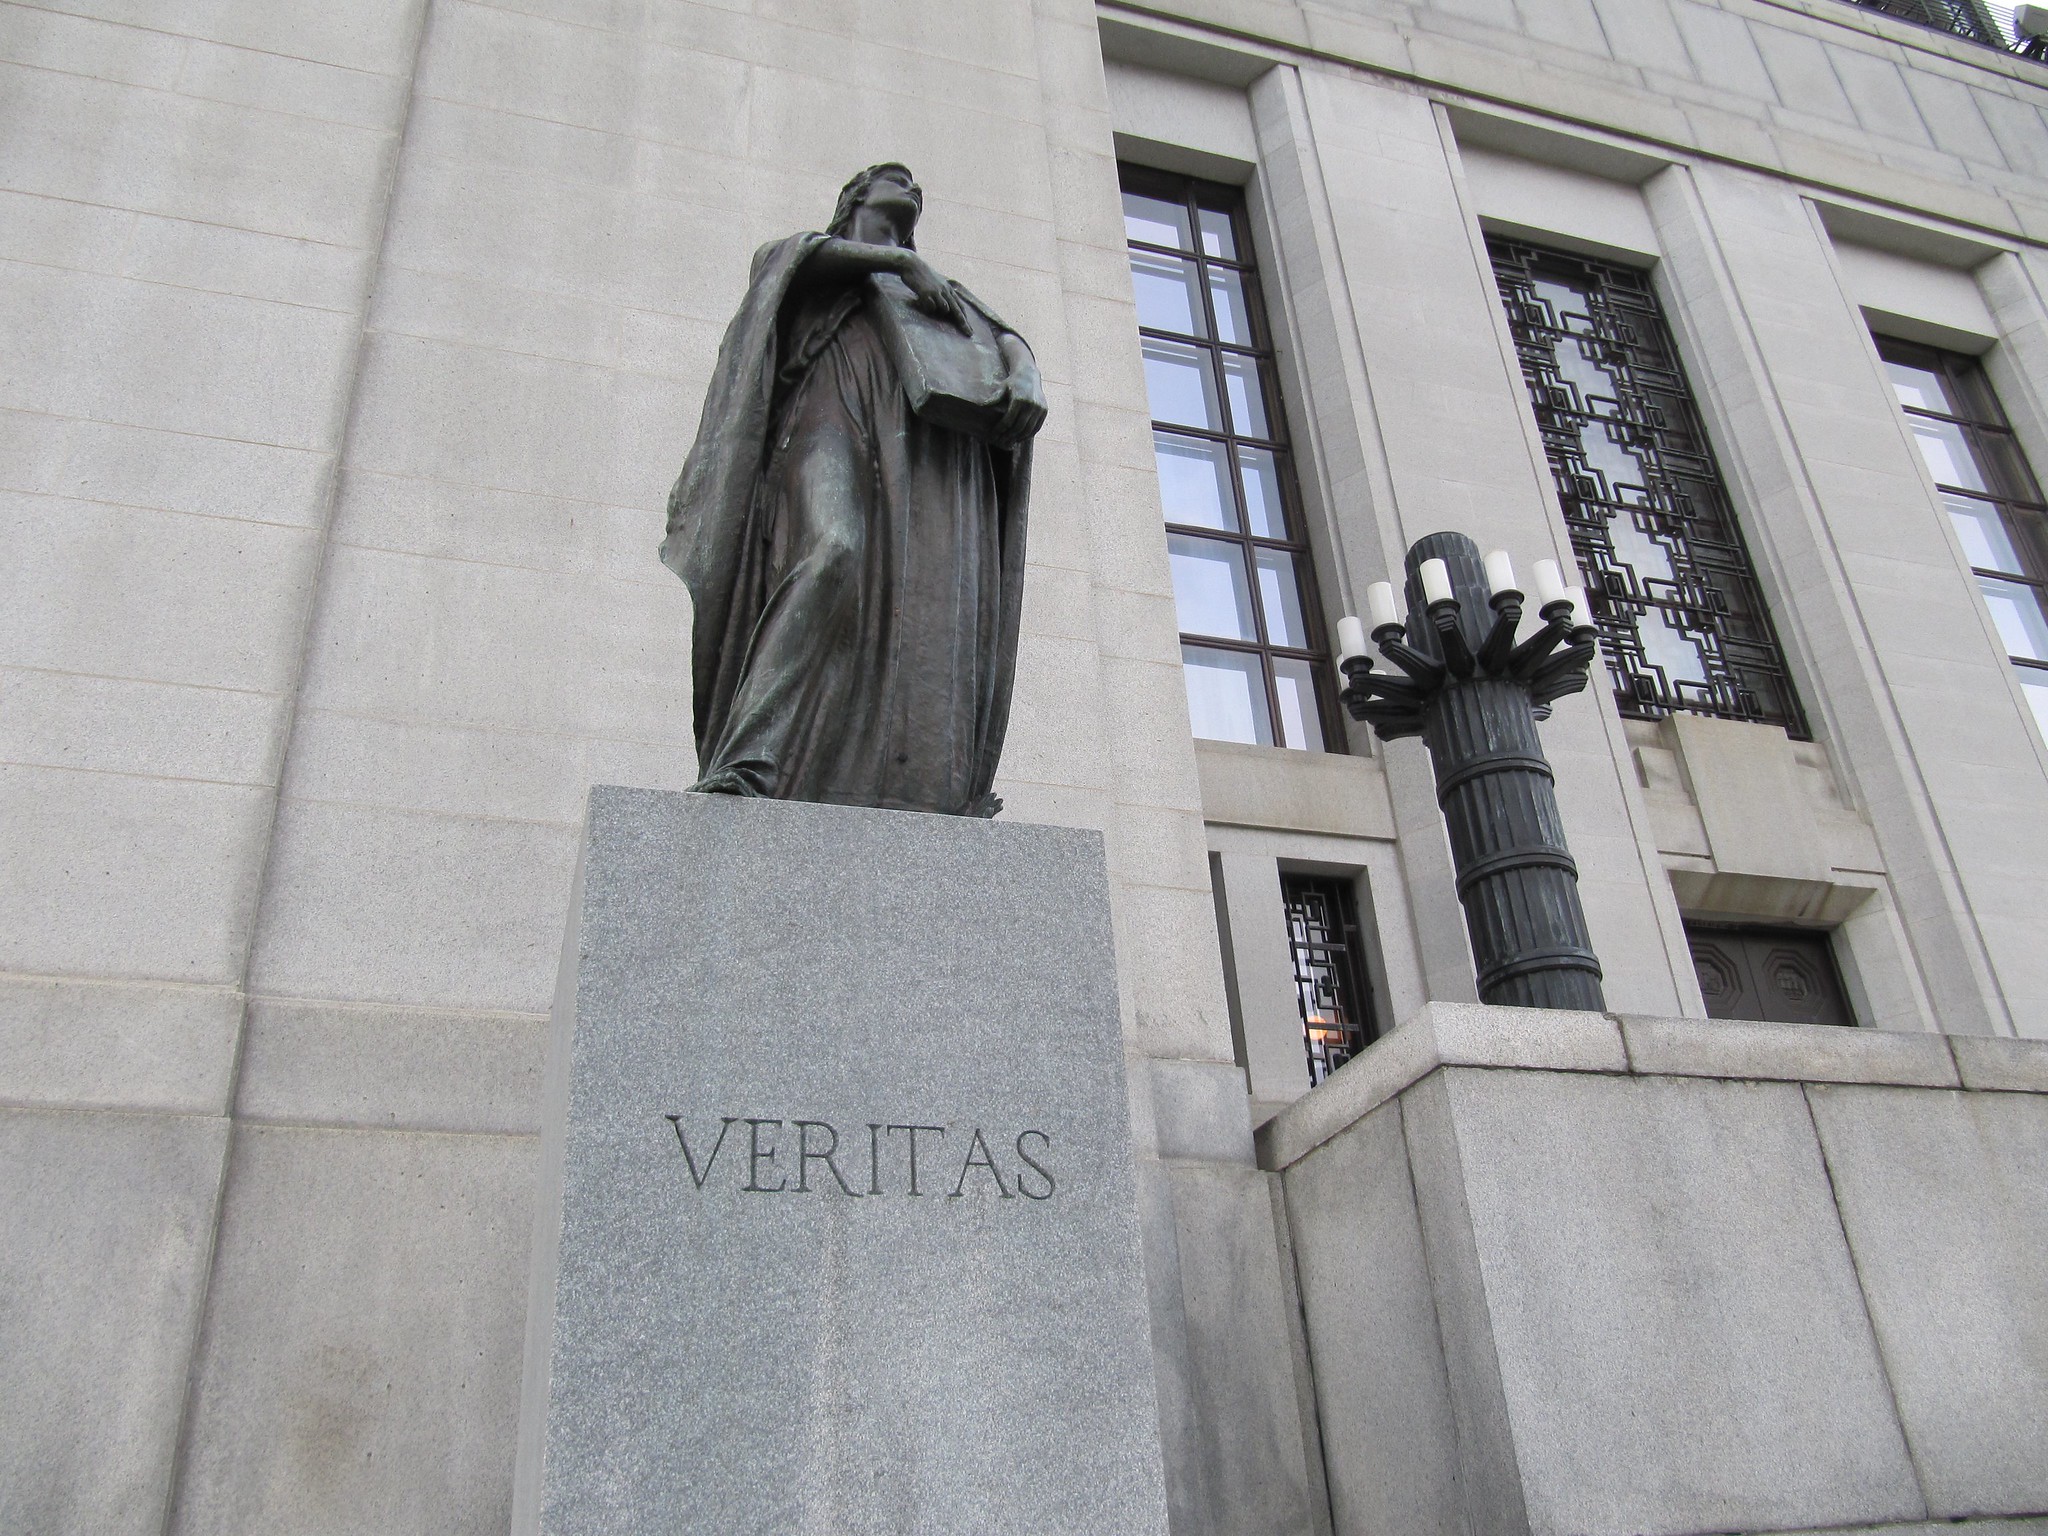 Statue of "Veritas" (goddess of Truth) at the Supreme Court of Canada, Ottawa. Image credit: Mike Gifford (Flickr, Creative Commons CC BY-NC-SA 2.0)